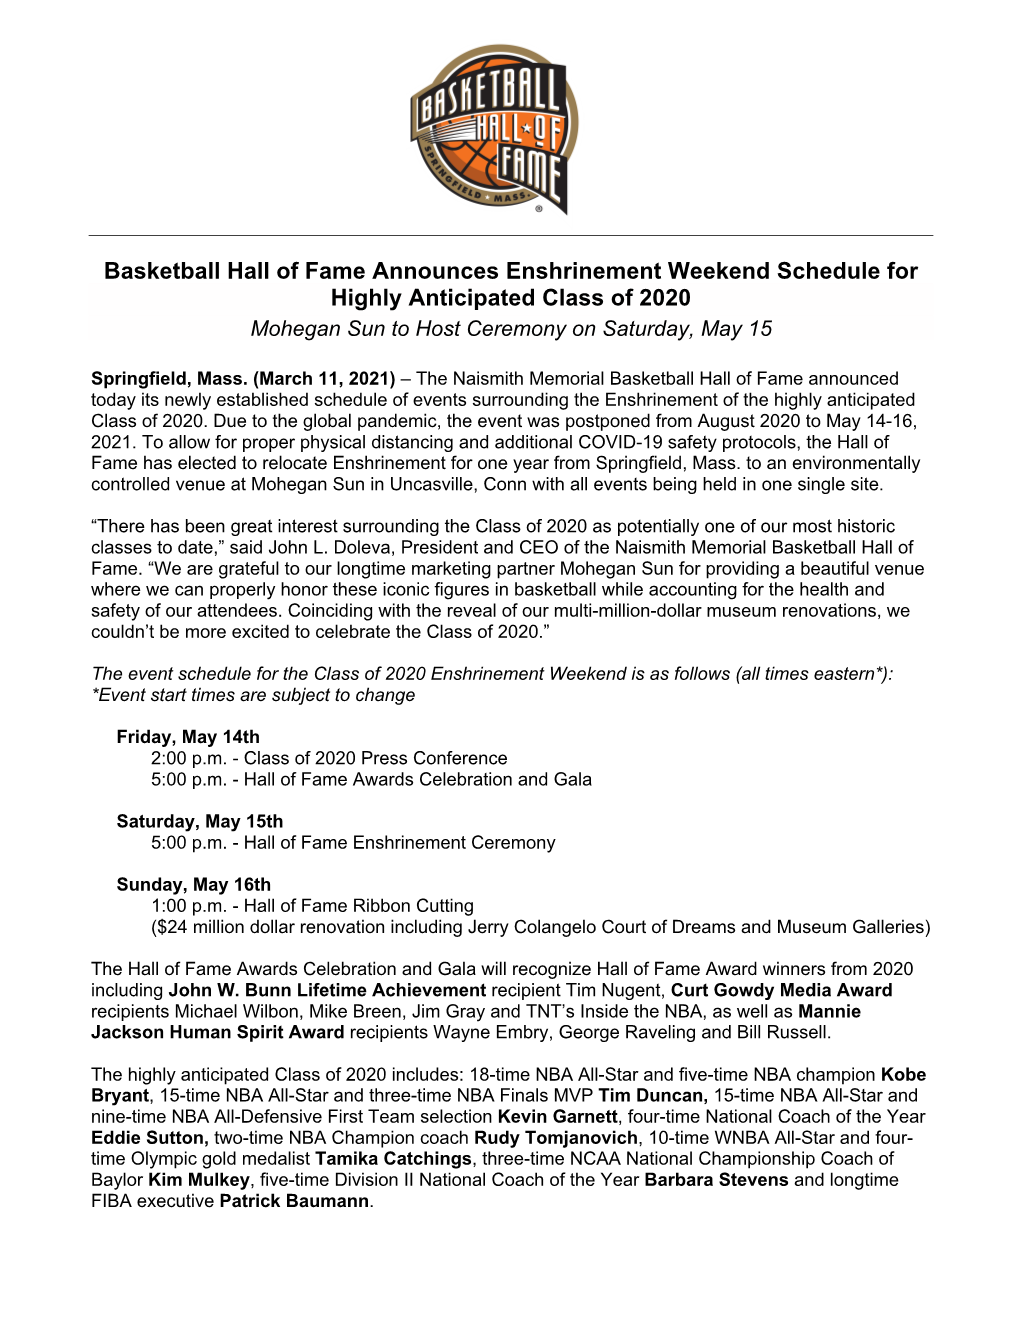 Basketball Hall of Fame Announces Enshrinement Weekend Schedule for Highly Anticipated Class of 2020 Mohegan Sun to Host Ceremony on Saturday, May 15